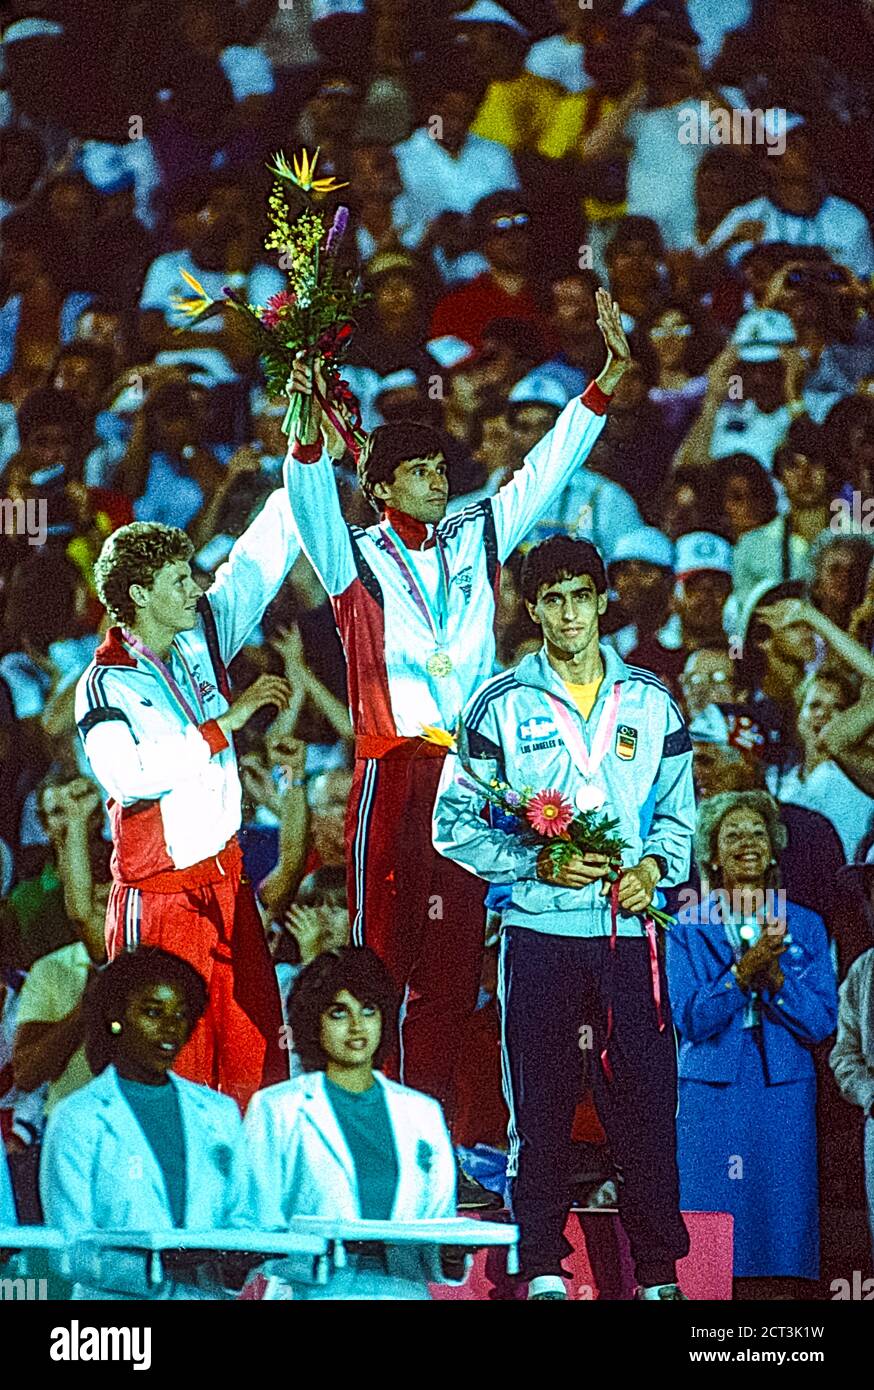 Seb Coe (GBR) winner of the gold medal in the1500m with Steve Cram (GBR) silver and   and José Manuel Abascal (ESP) bronze at the 1984 Olympic Summer Games Olympic Stock Photo